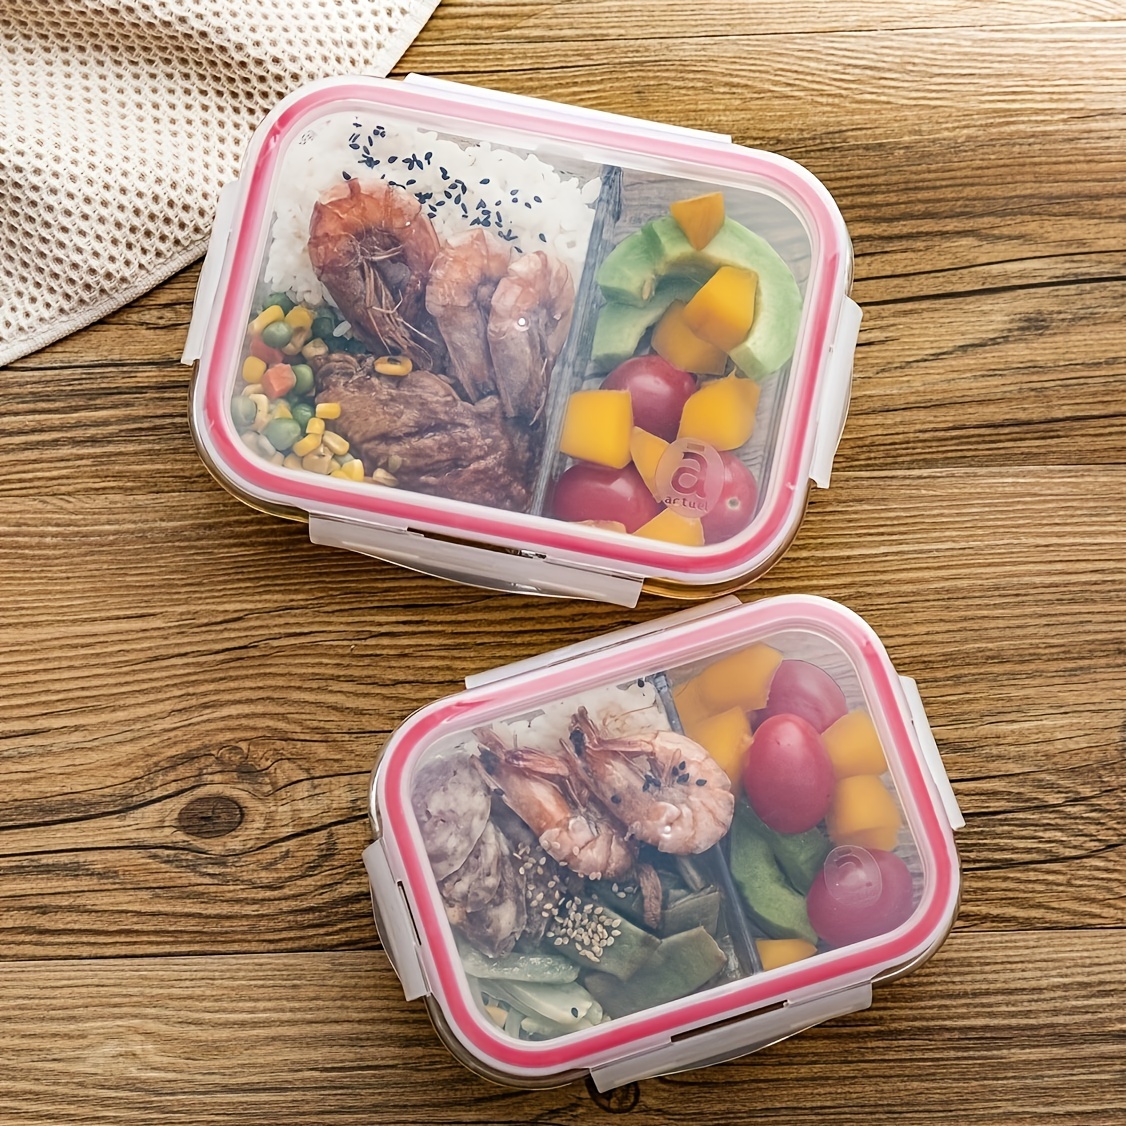 1pc Blue Heatable Bento Box With Dividers, Fresh-keeping And